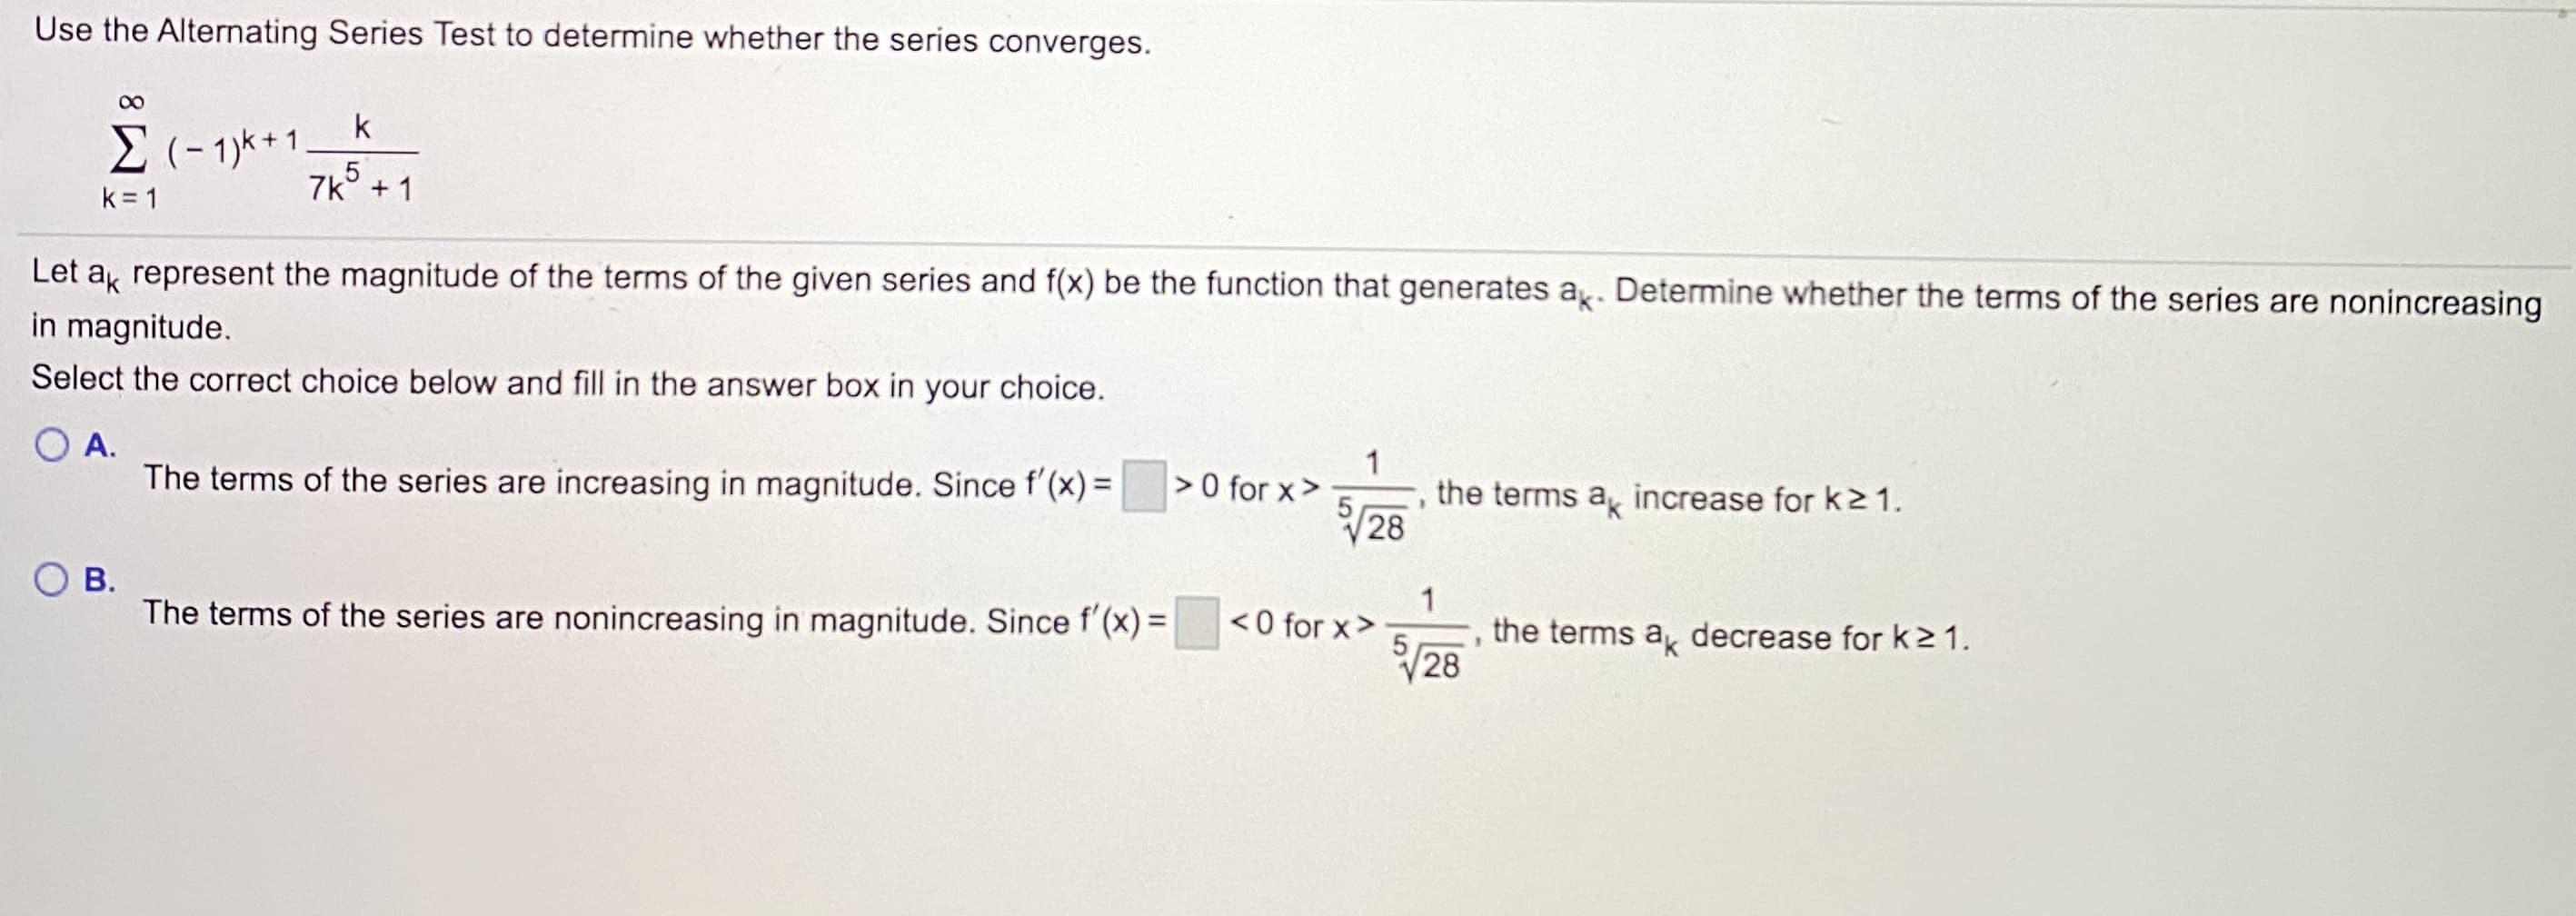 Use the Alternating Series Test to determine whether the series converges.
00
k
E (- 1)k+1
7k° + 1
k = 1
Let a represent the magnitude of the terms of the given series and f(x) be the function that generates a. Determine whether the terms of the series are nonincreasing
in magnitude.
Select the correct choice below and fill in the answer box in your choice.
O A.
The terms of the series are increasing in magnitude. Since f'(x) =
1
> 0 for x>
51
28
the terms a, increase for k2 1.
В.
1
the terms a, decrease for k21.
28
The terms of the series are nonincreasing in magnitude. Since f'(x) =
< 0 for x>
